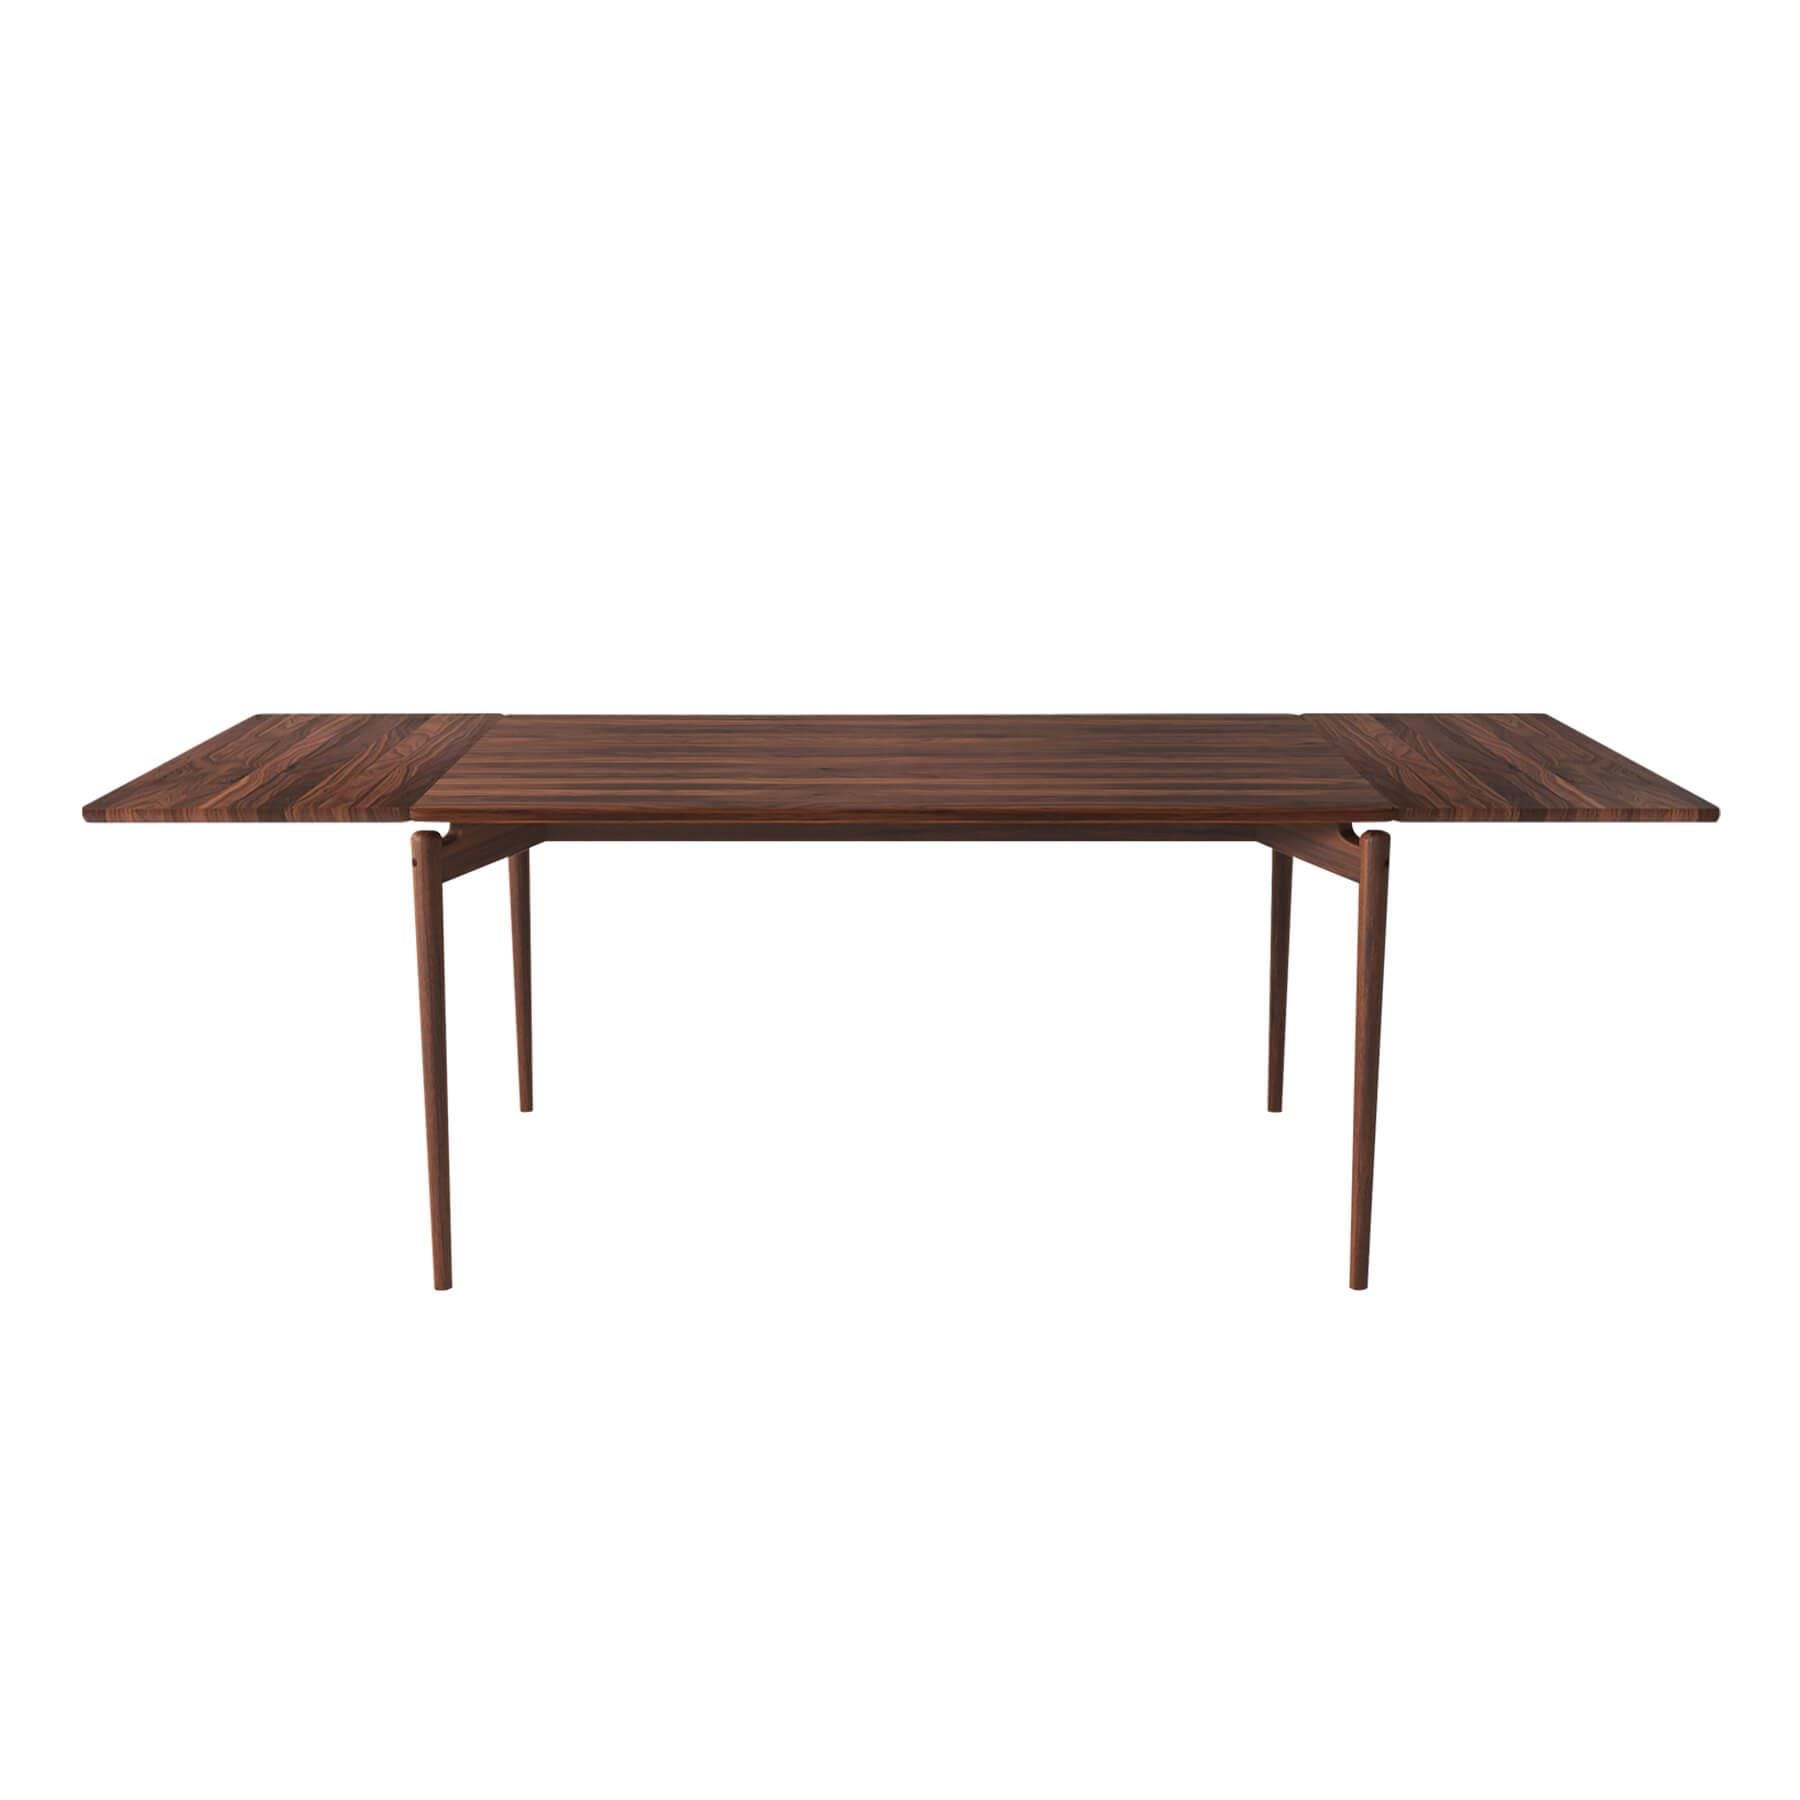 Bruunmunch Pure Dining Table 140cm Walnut Natural Oil 2 Matching Plates Dark Wood Designer Furniture From Holloways Of Ludlow